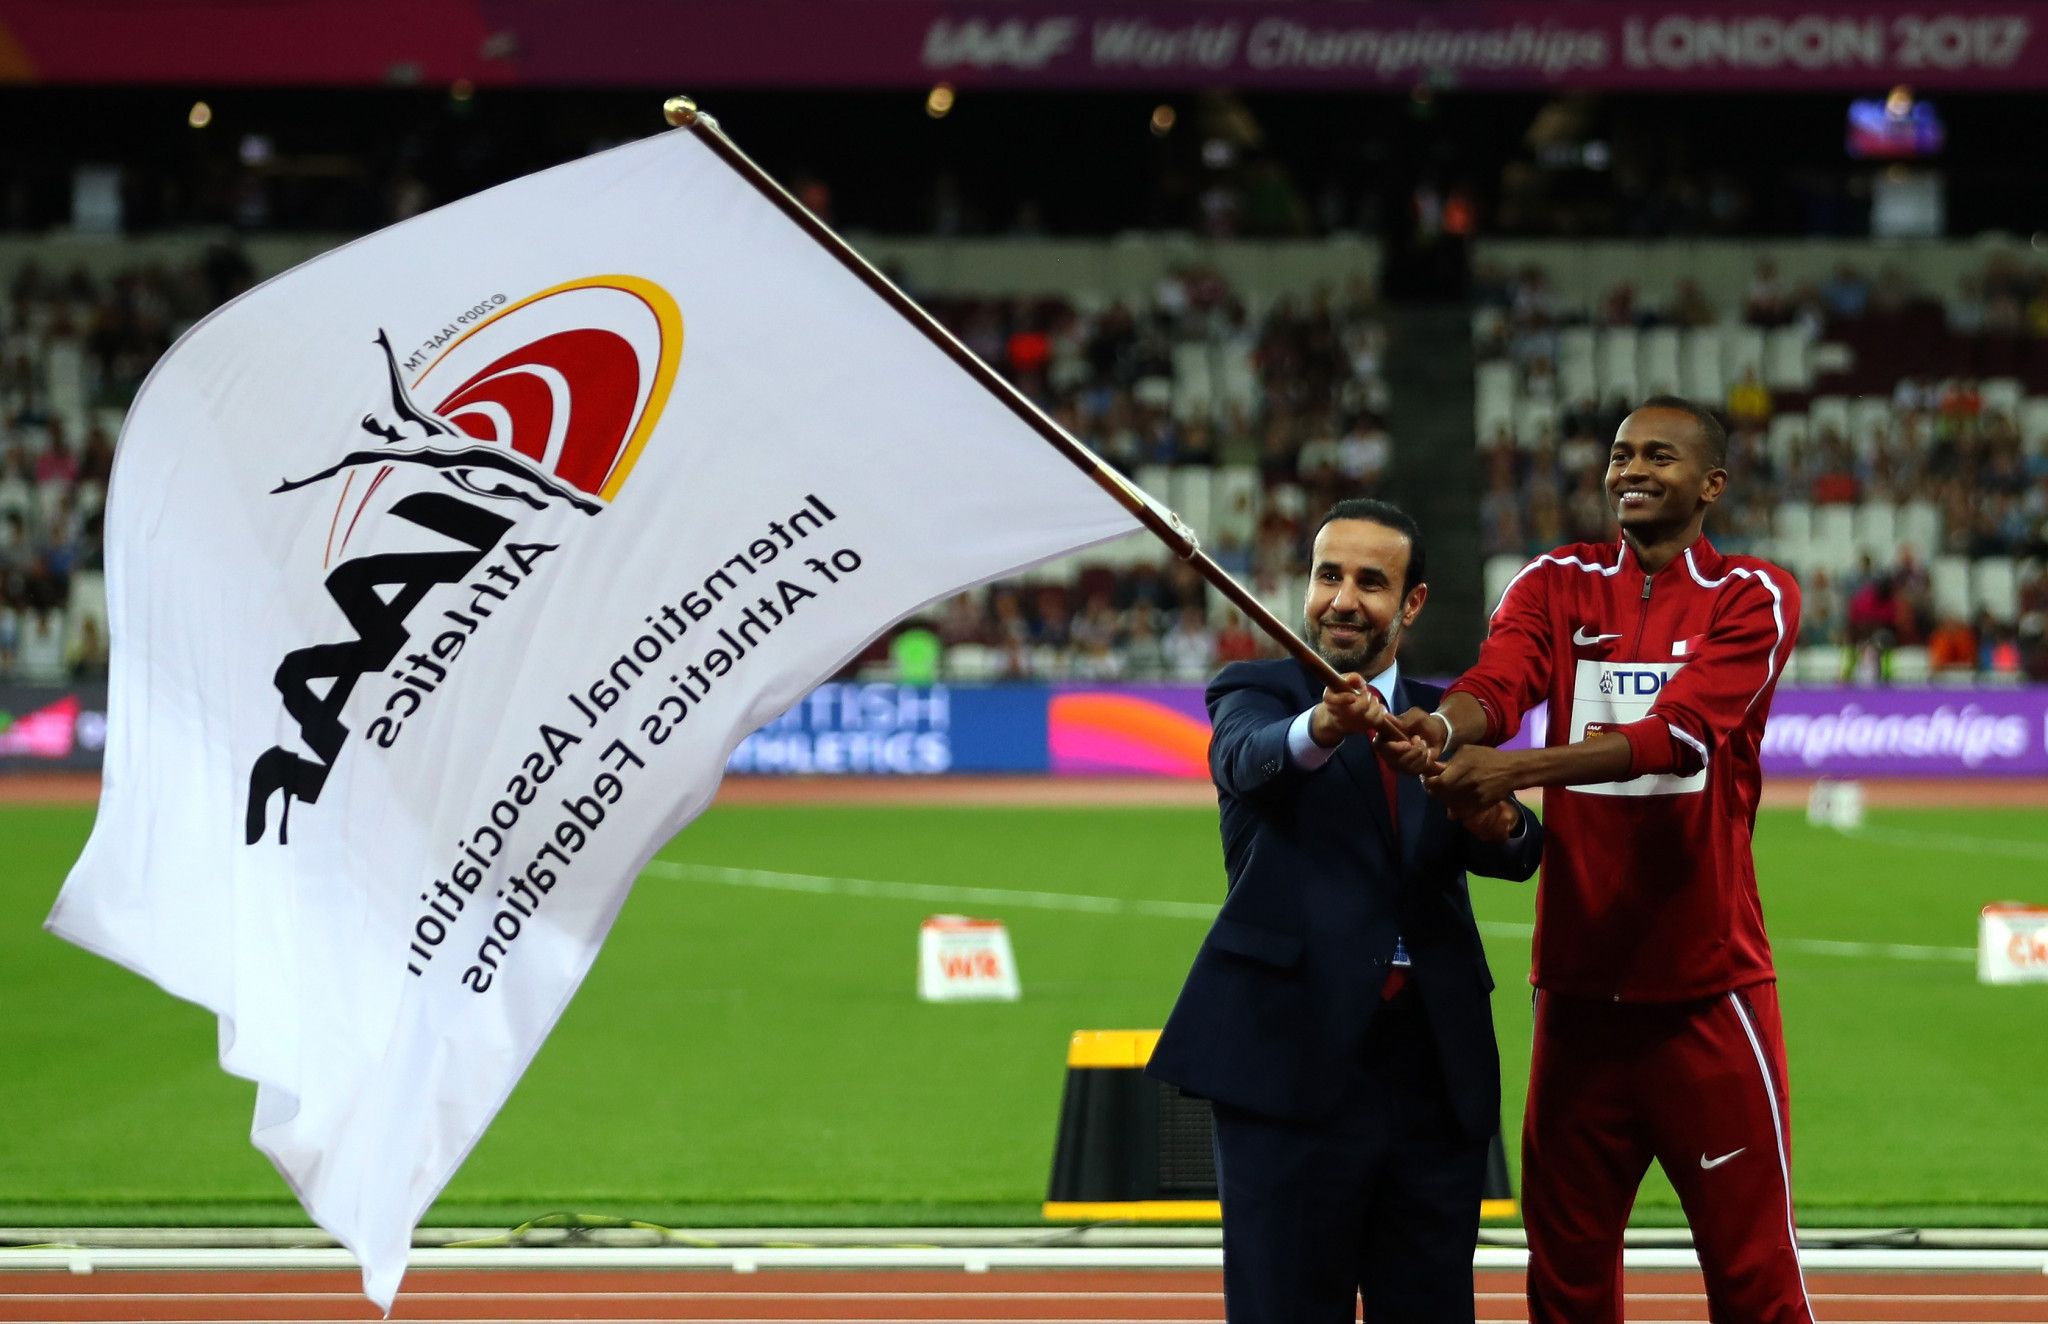 Doha beat Eugene to the 2019 World Championships but the American city were named as 2021 hosts five months later ©Getty Images